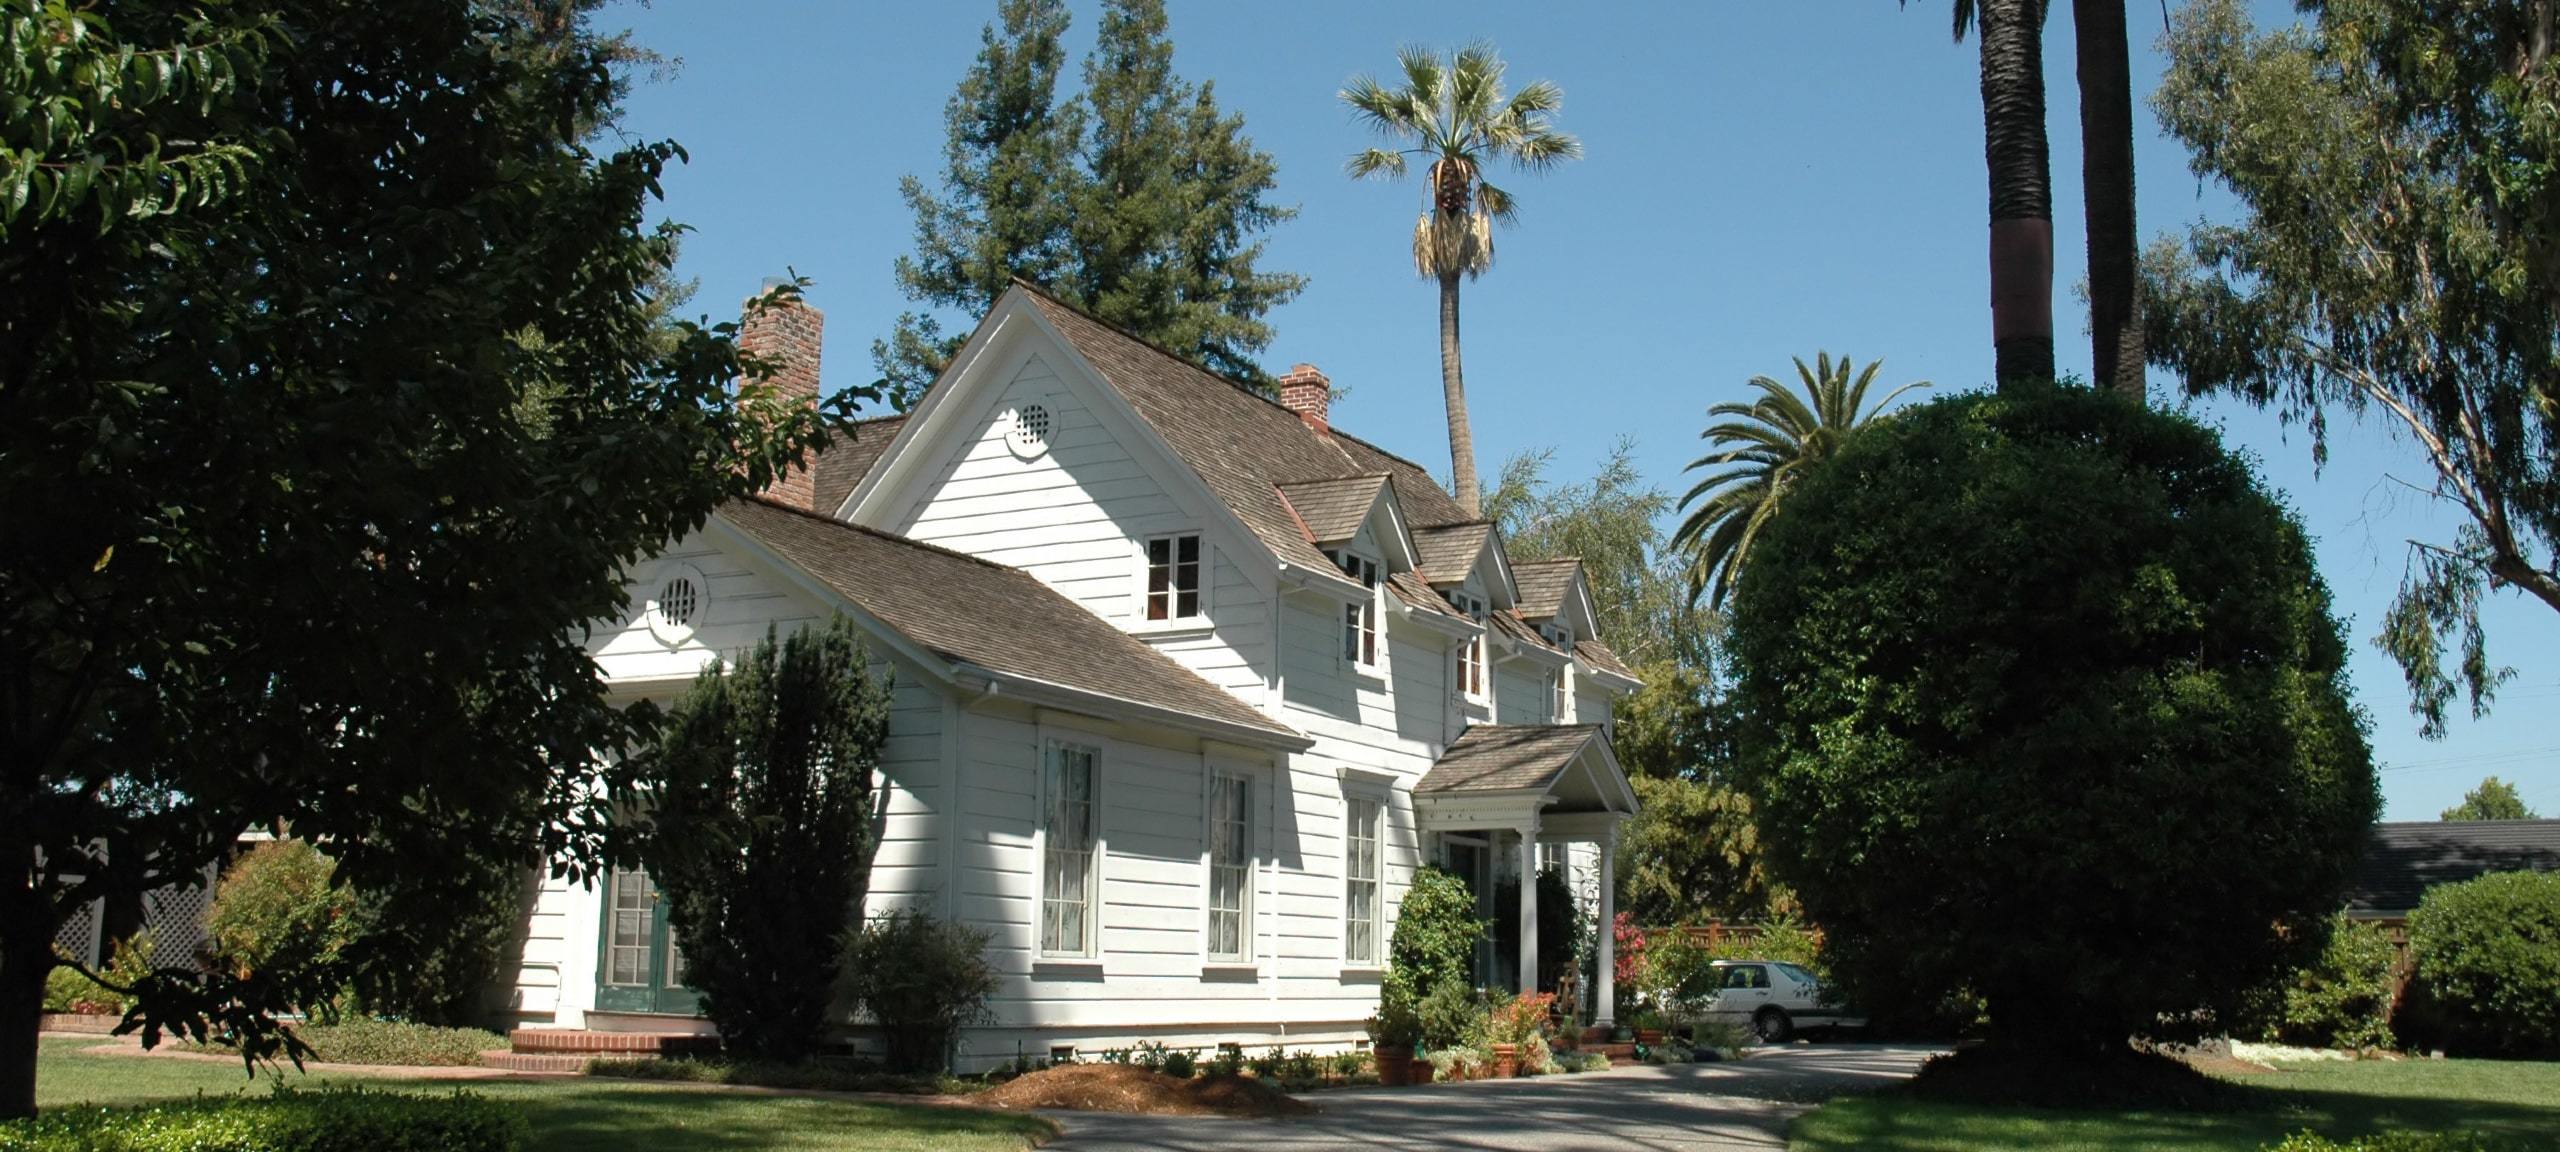 The Wright House, historic home in Sunnyvale, CA